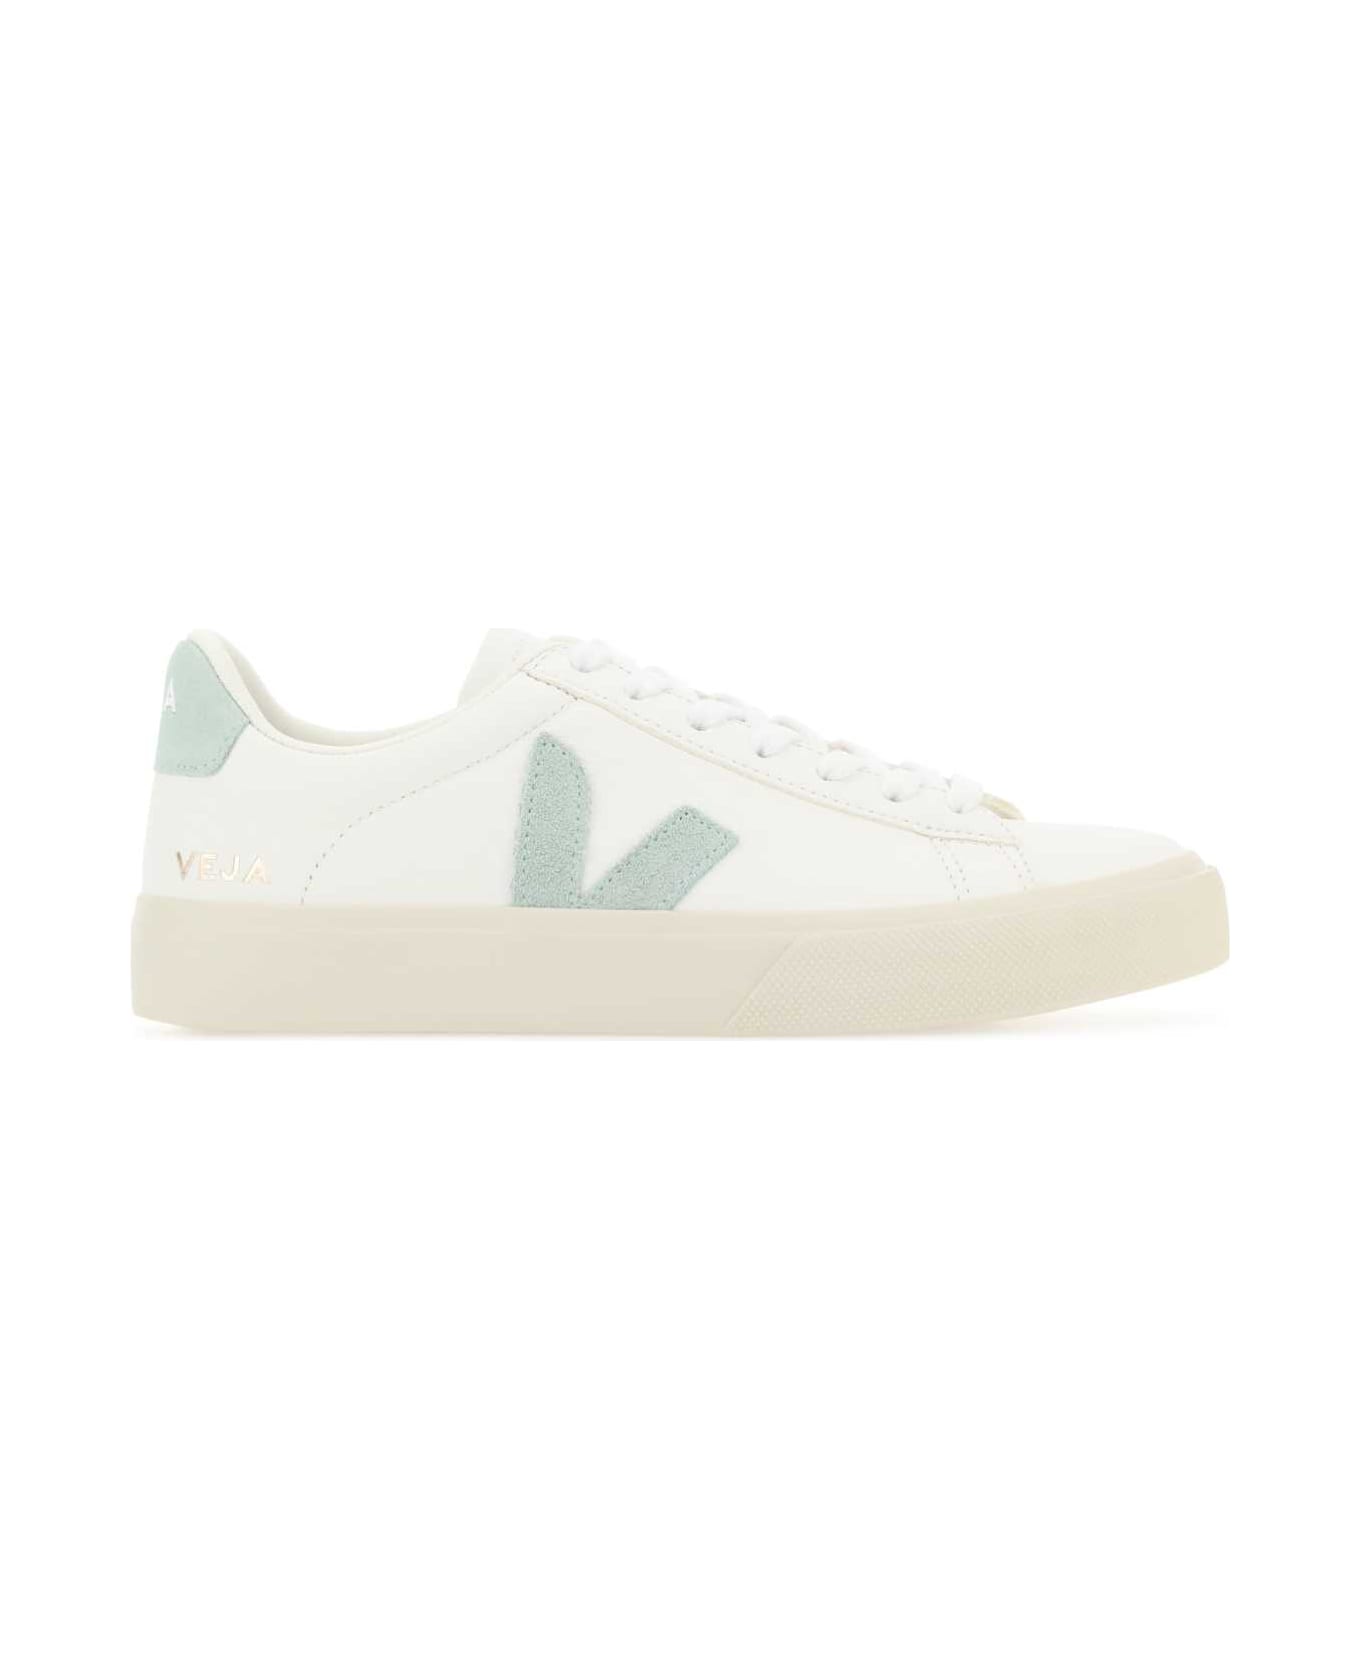 Veja White Chromefree Leather Campo Sneakers - EXTRAWHITEMATCHA スニーカー